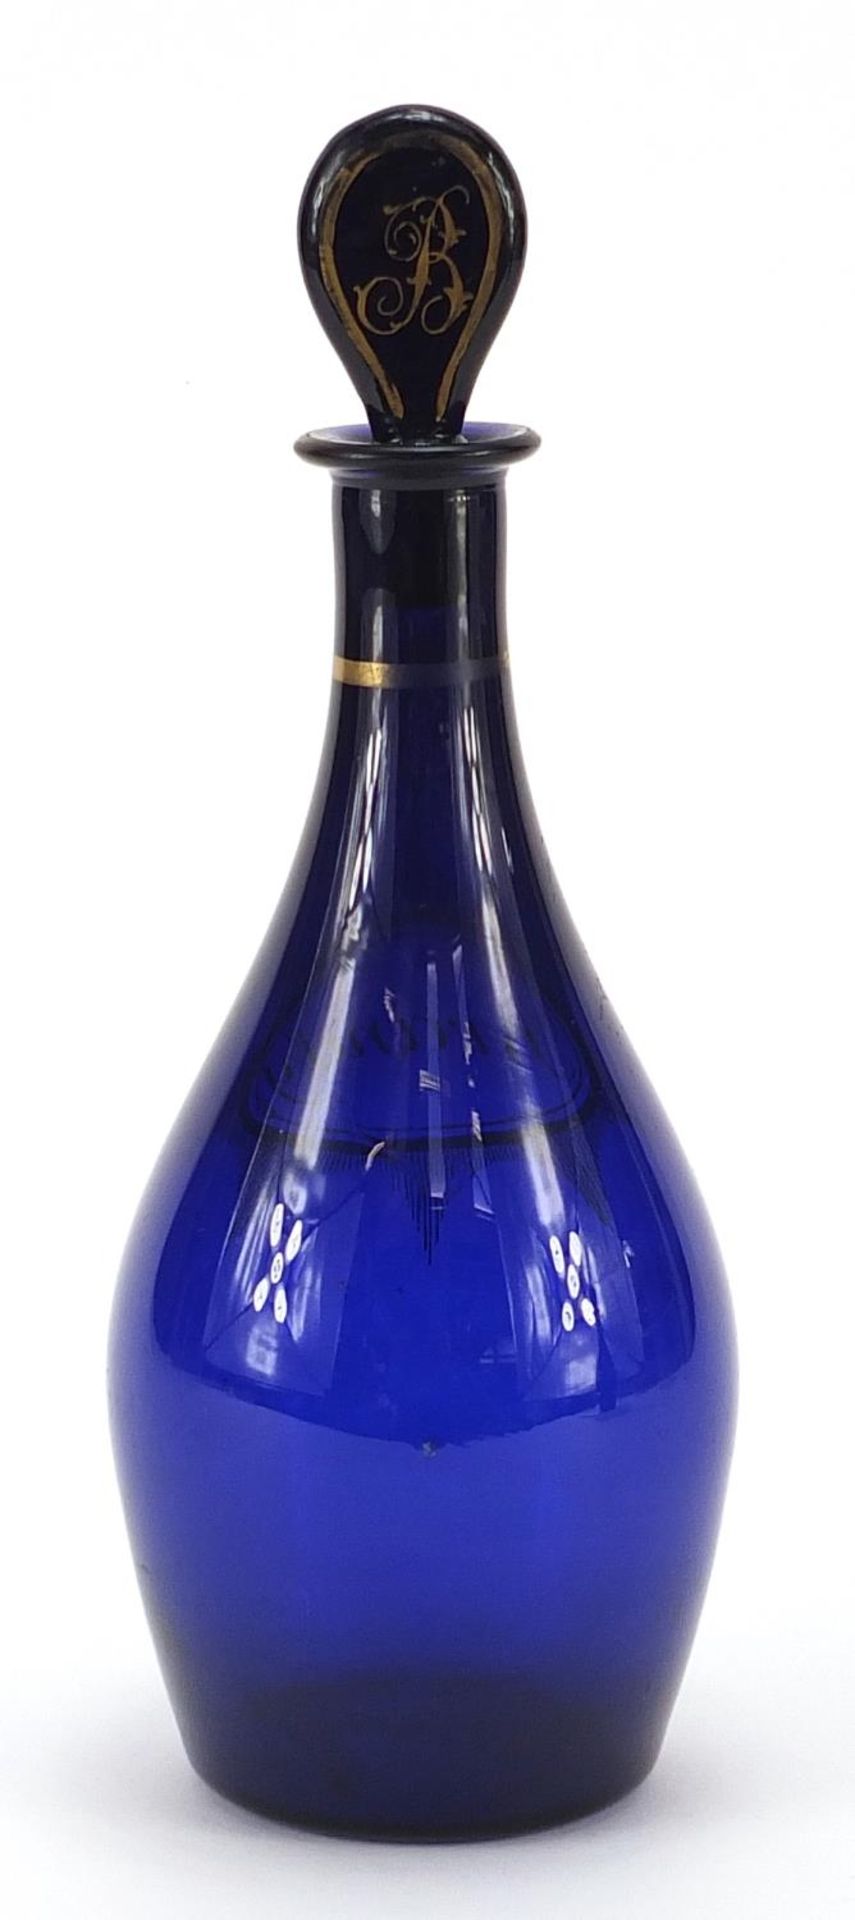 18th/19th century Bristol blue glass decanter with gilt decoration, inscribed Brandy, 24cm high - Image 2 of 3